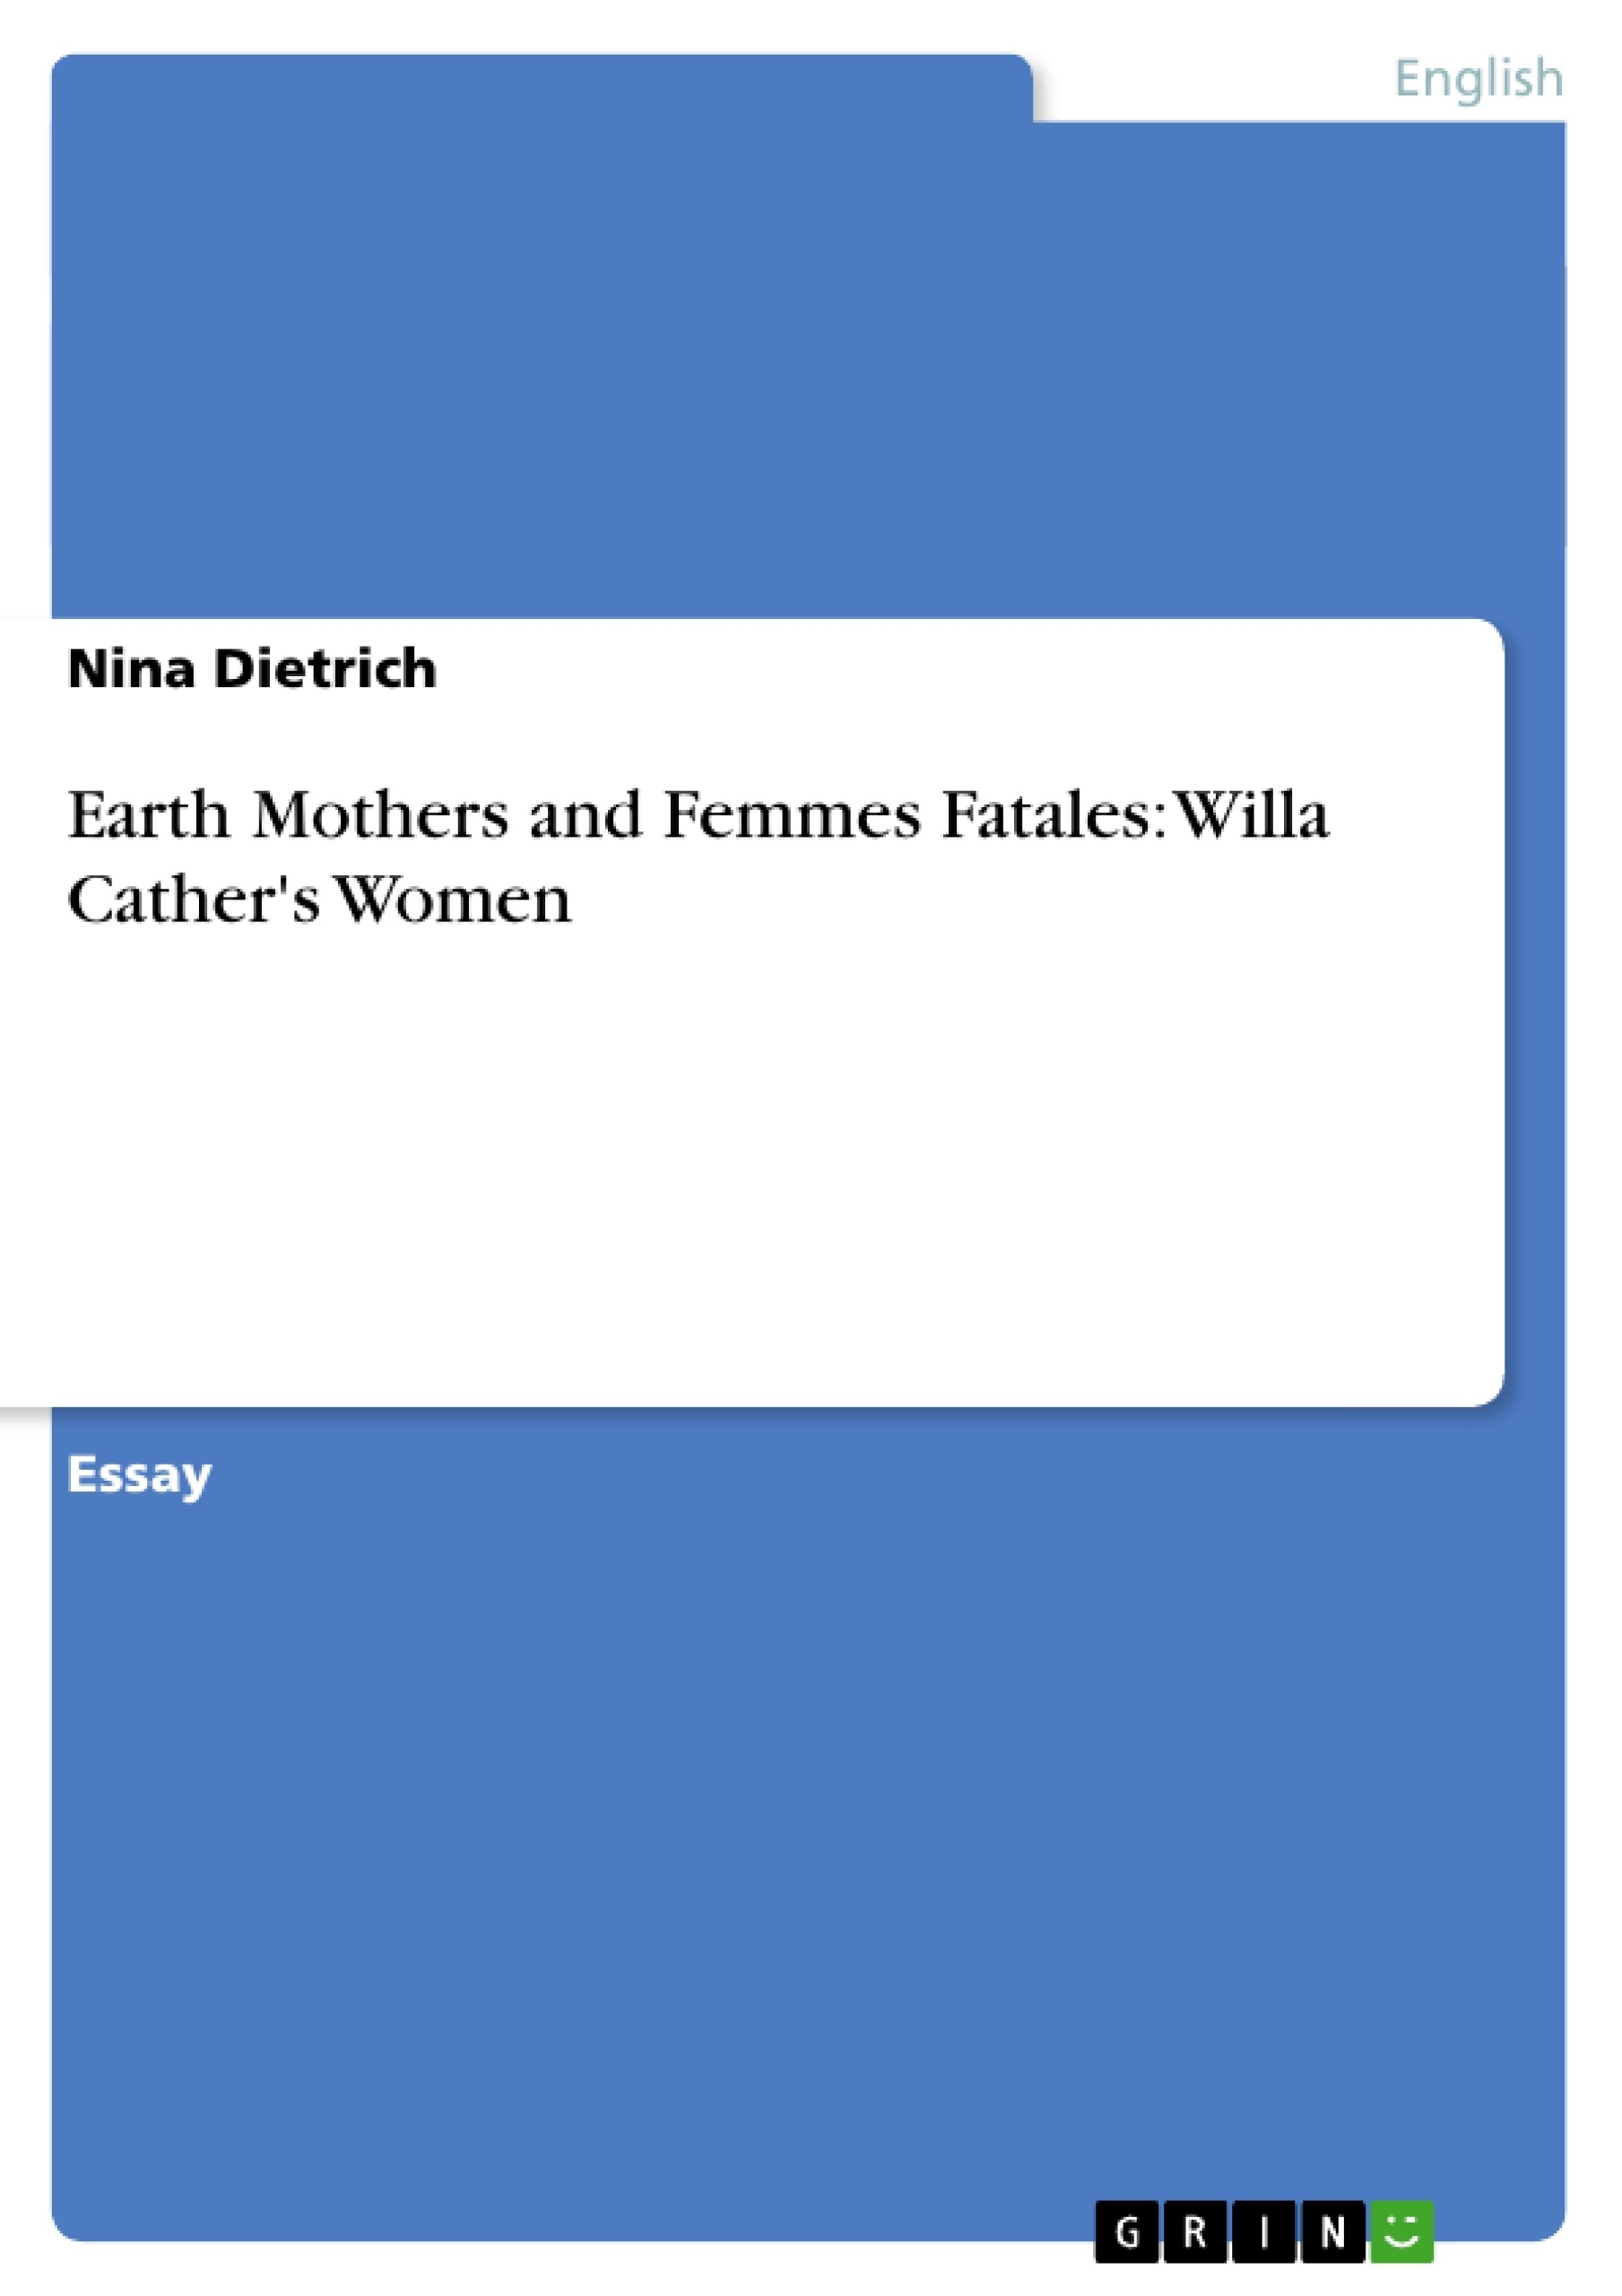 Title: Earth Mothers and Femmes Fatales: Willa Cather's Women